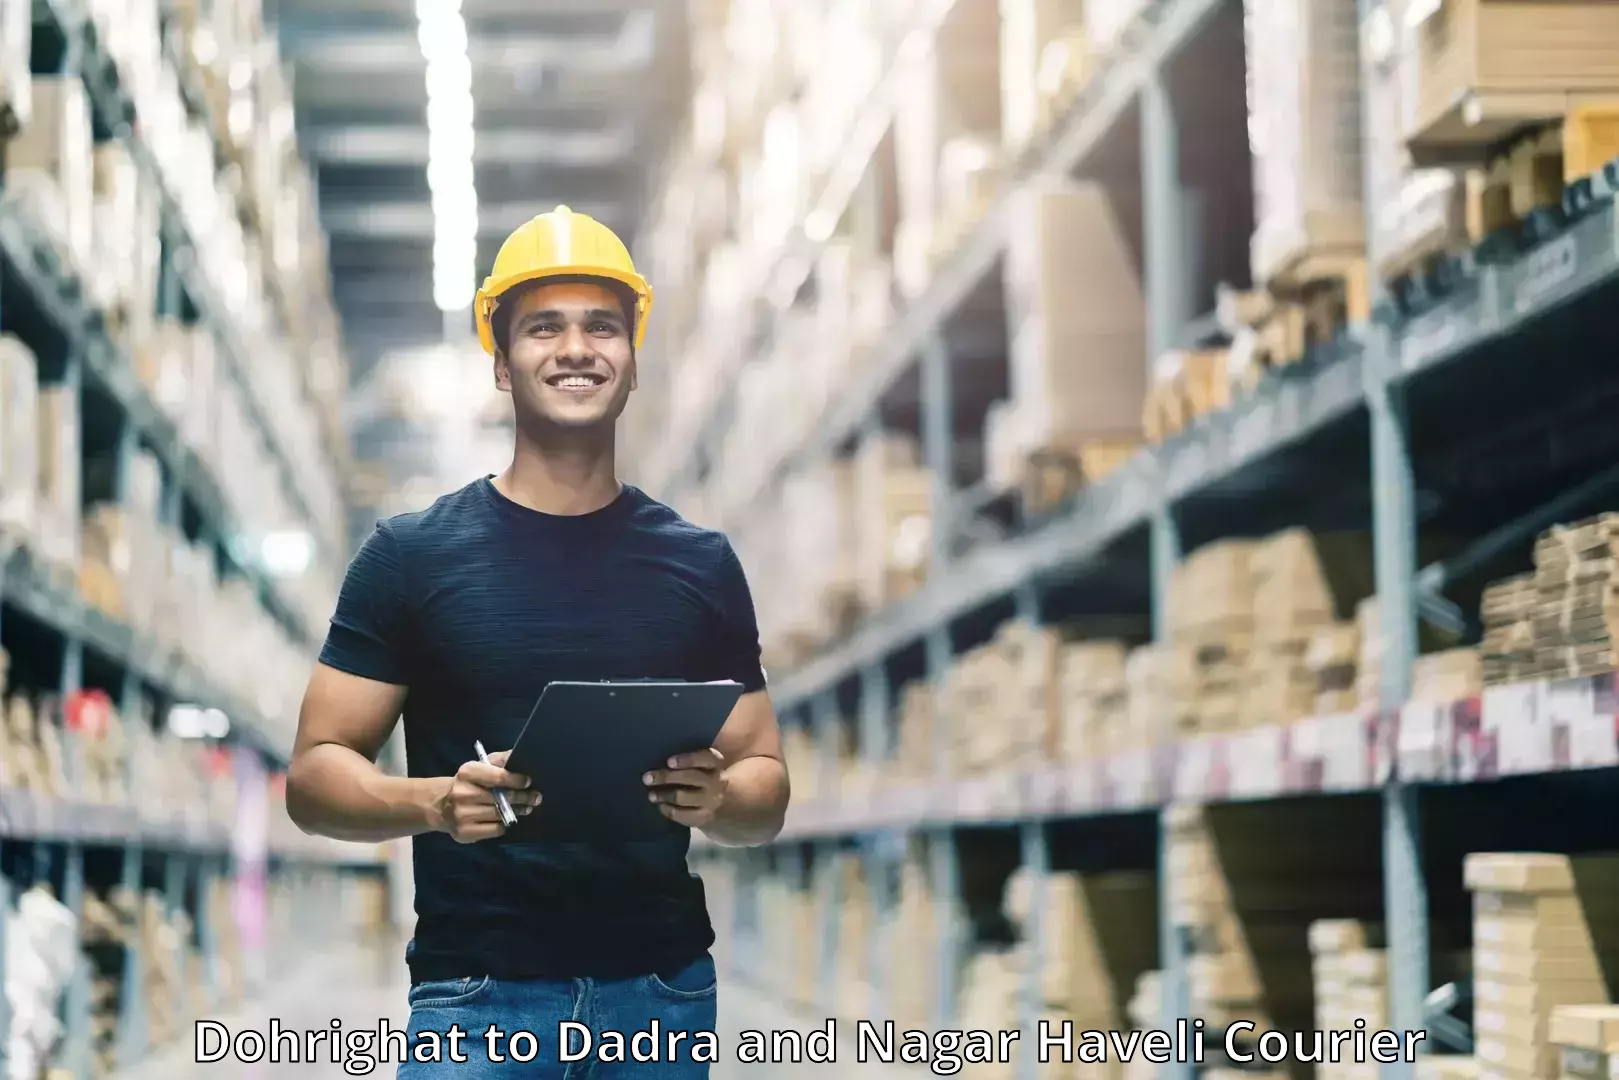 Parcel delivery automation Dohrighat to Dadra and Nagar Haveli